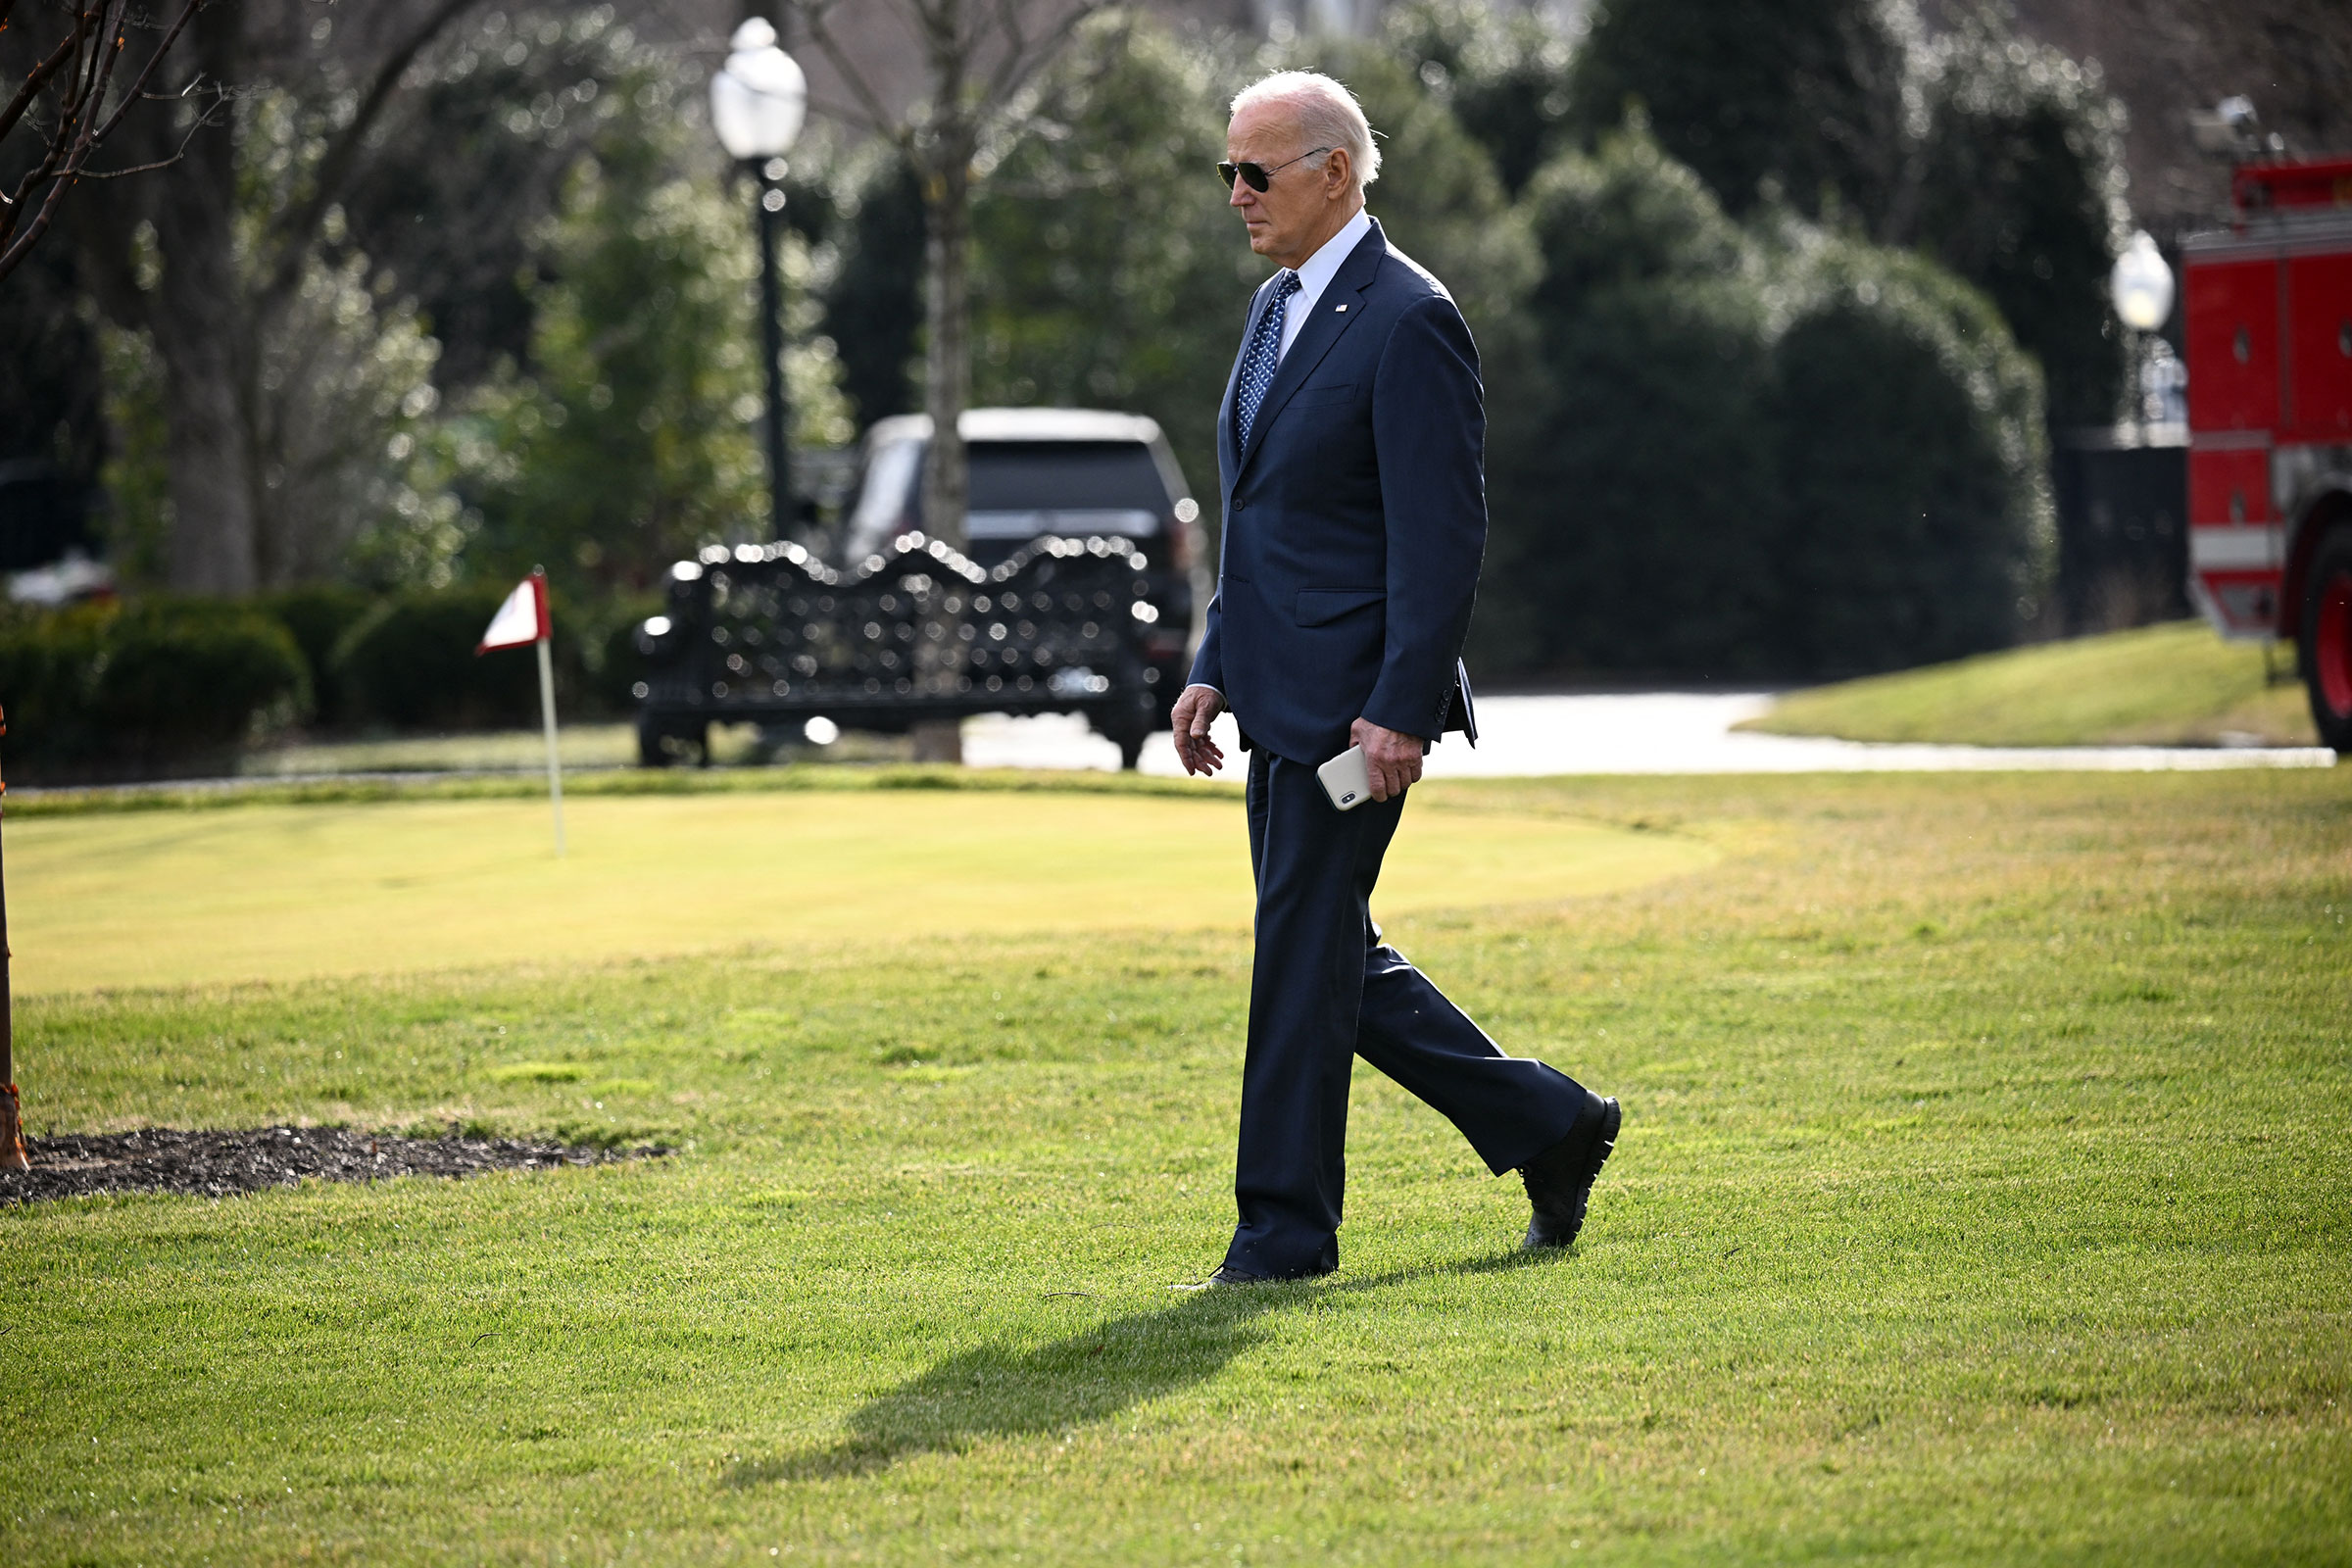 President Joe Biden makes his way to board Marine One from the South Lawn of the White House in Washington, DC, on February 8. 